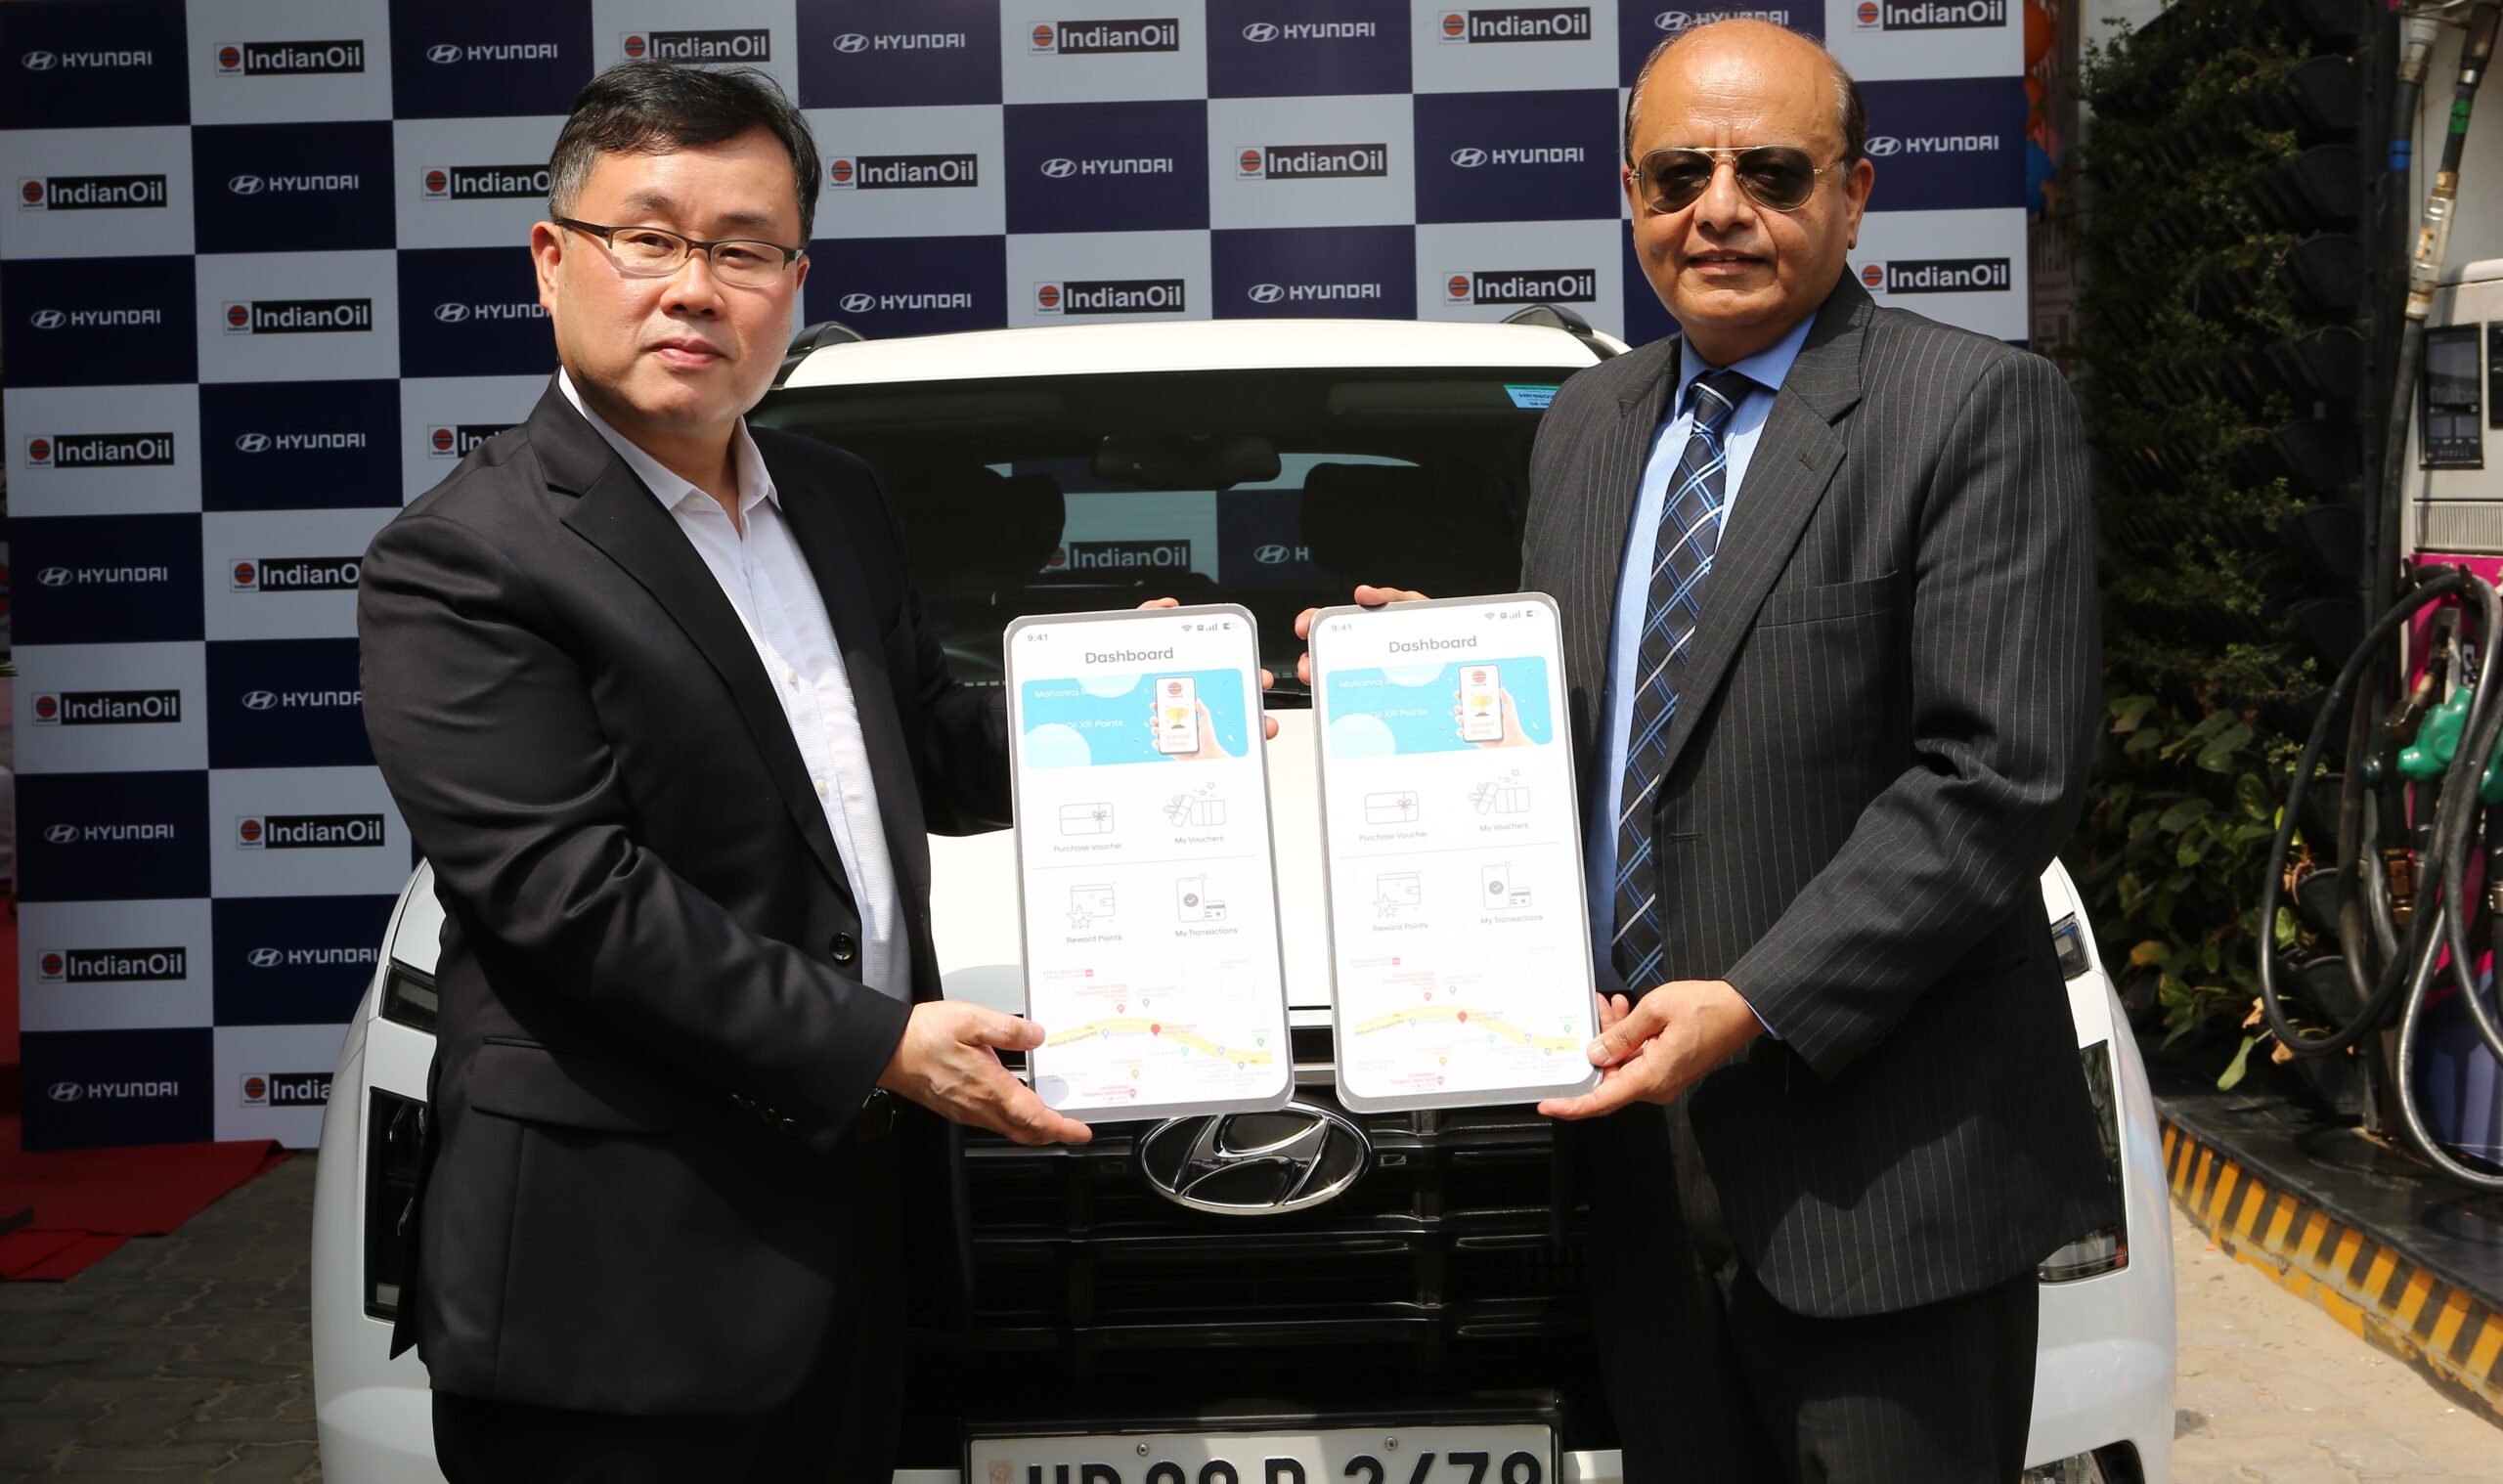 Hyundai Announces First In-App Digital Services For Parking And Fuel Purchase